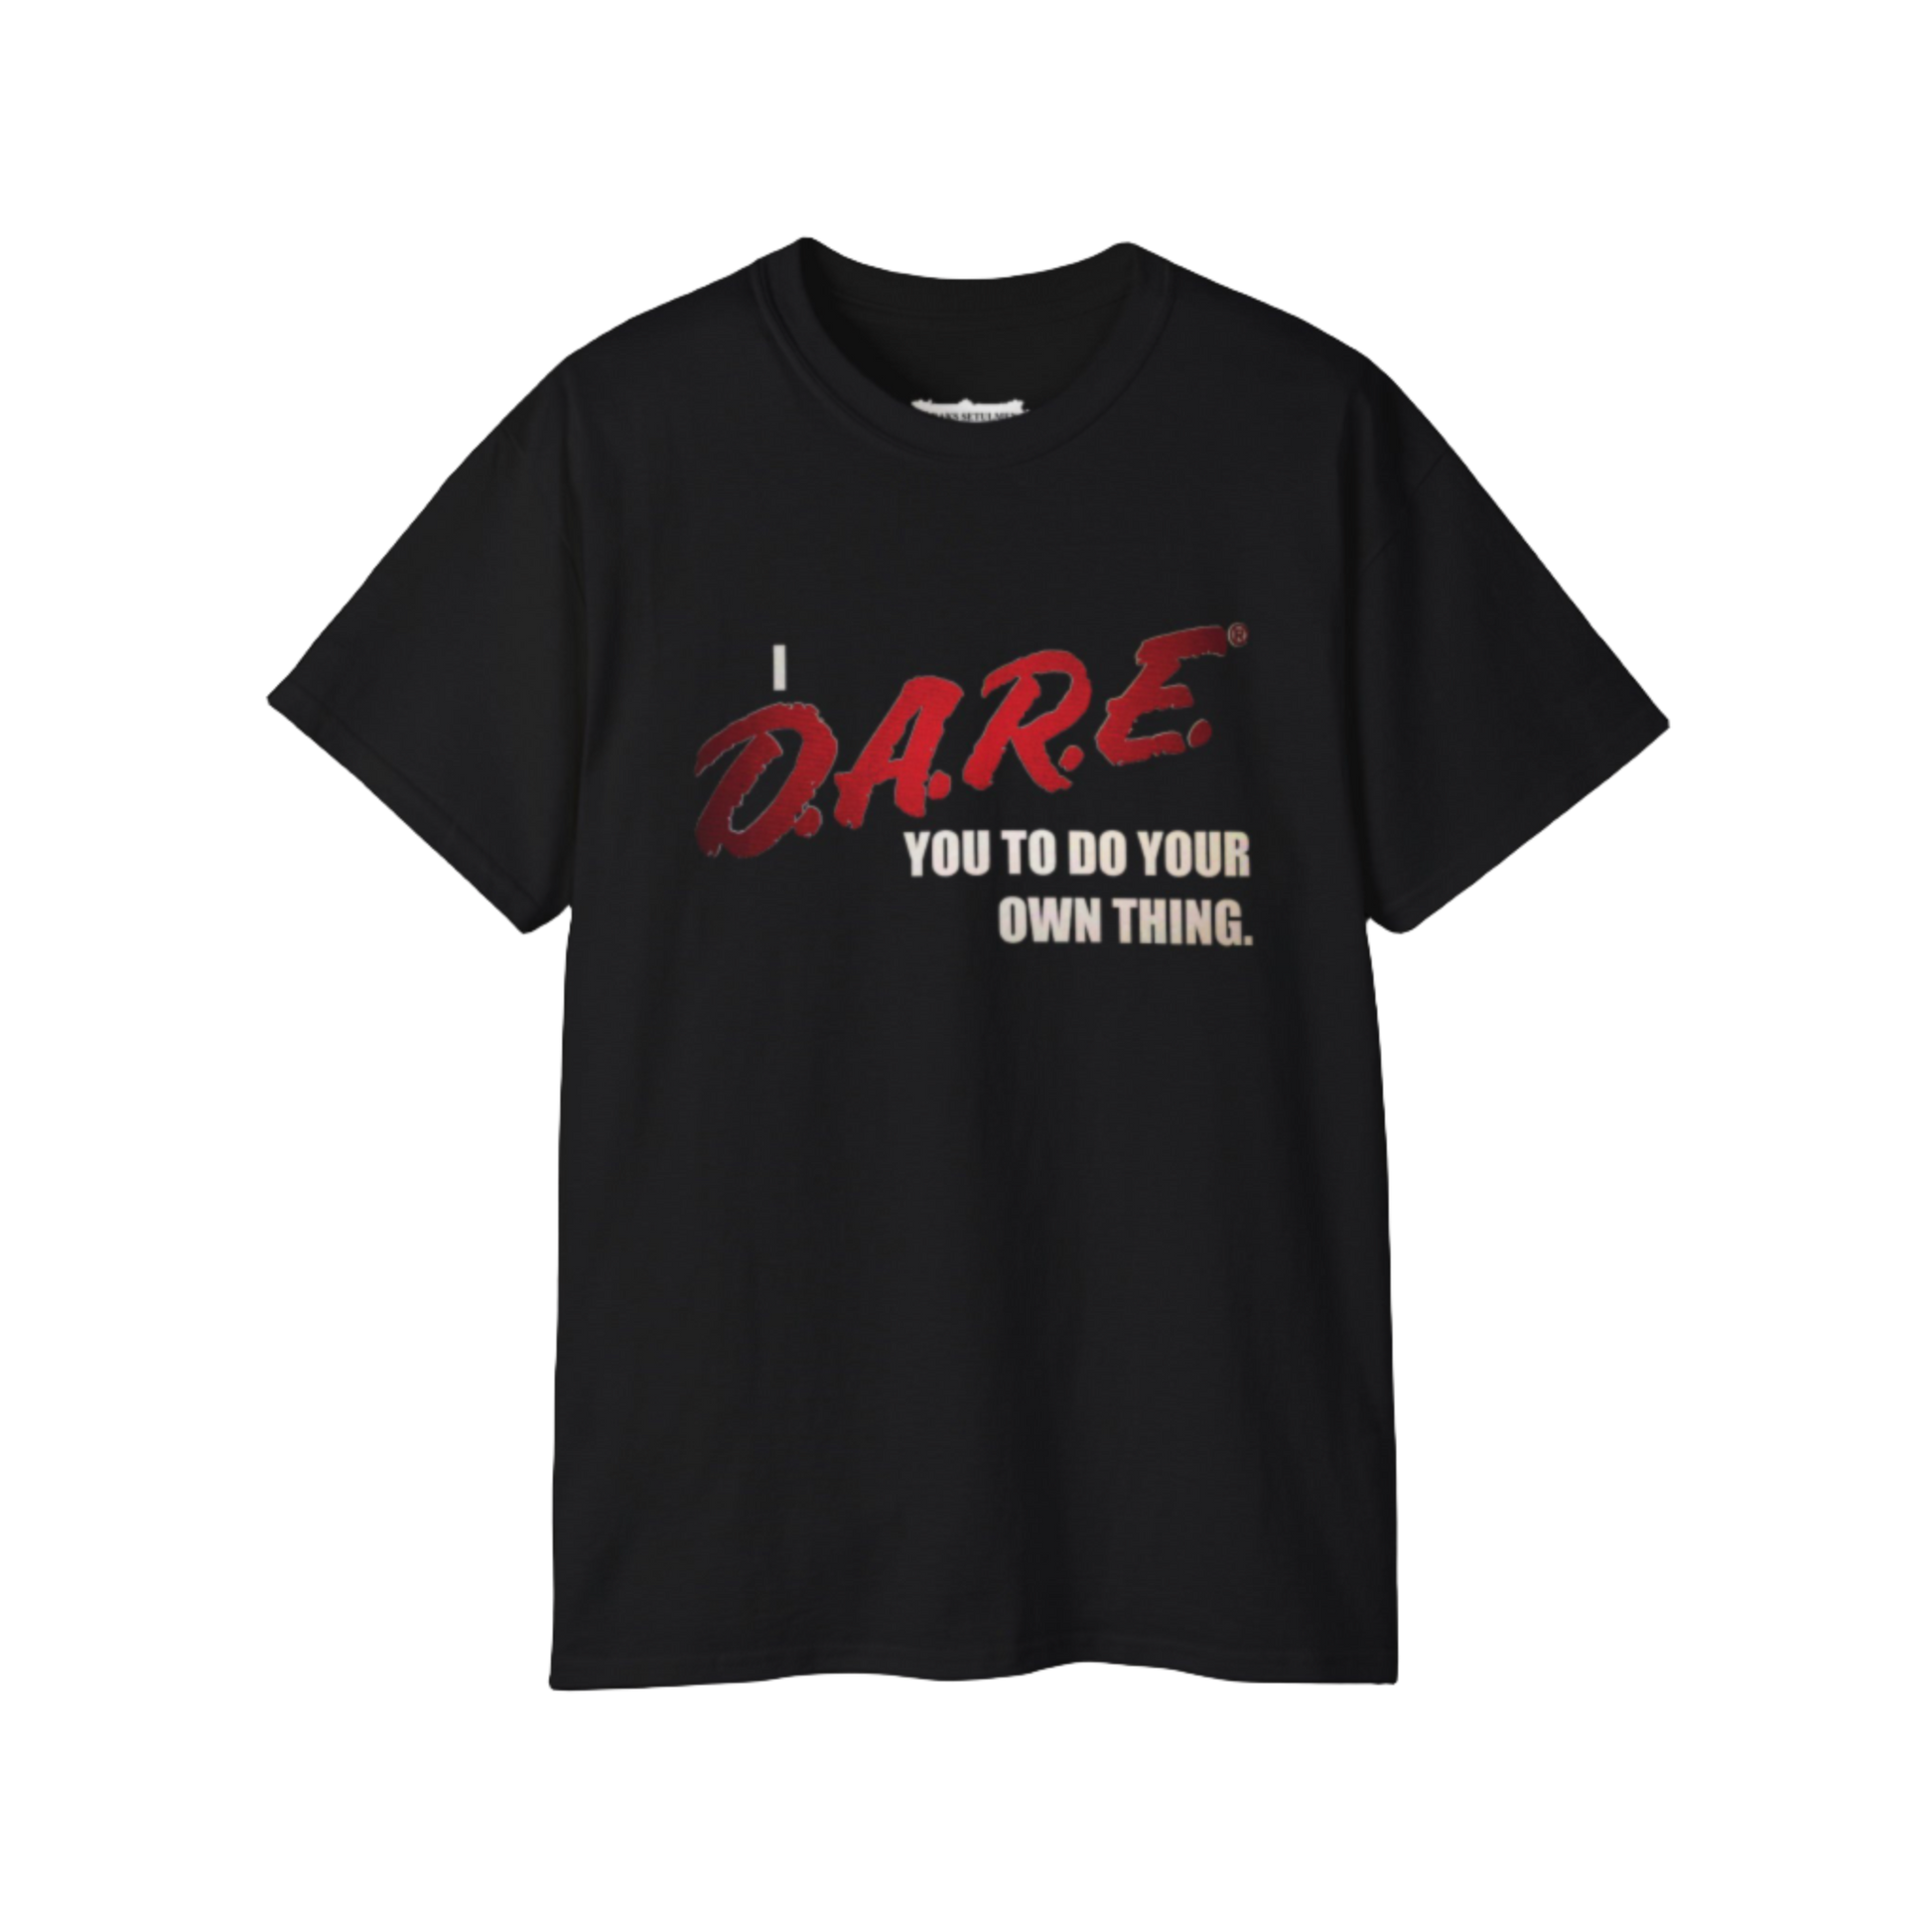 Black tee w/ D.A.R.E inspired graphic